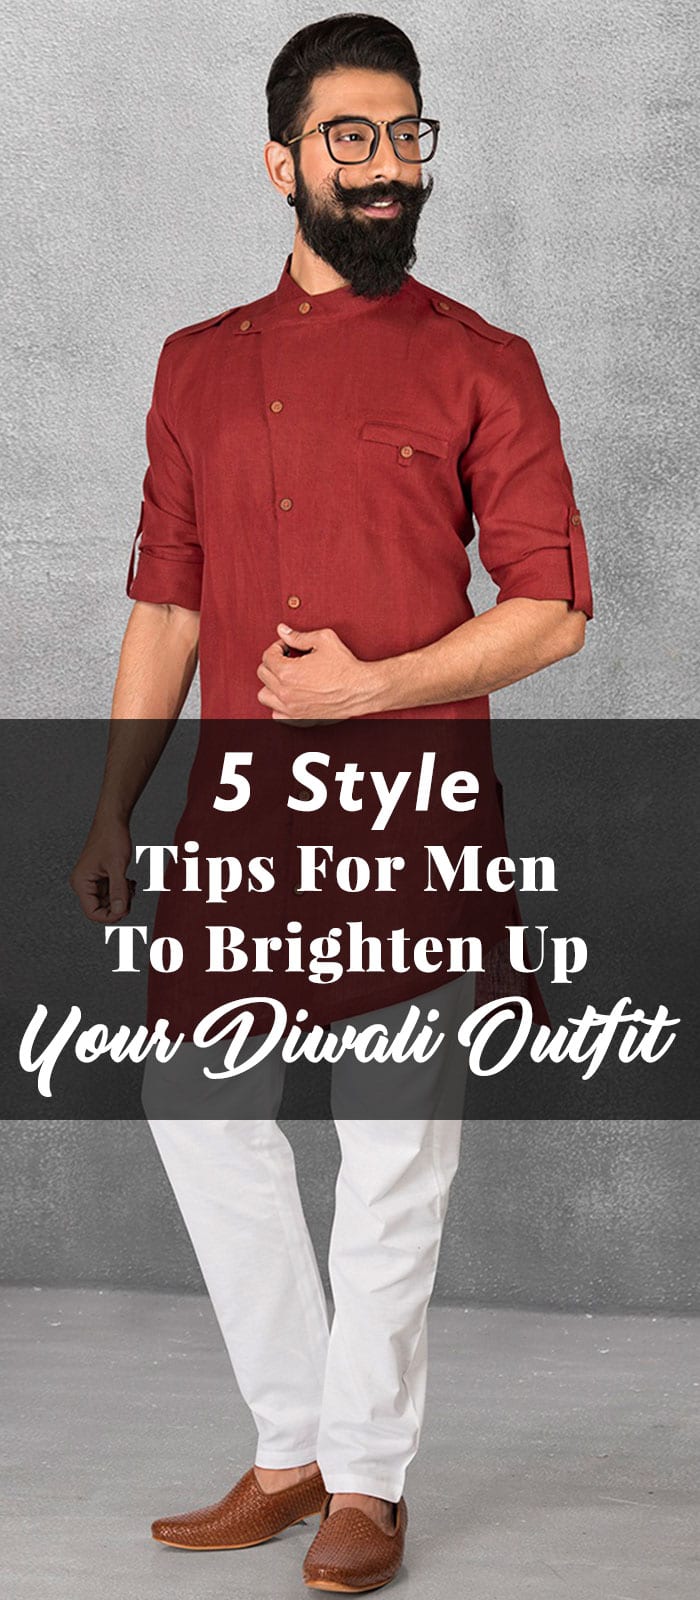 5 Style Tips For Men To Brighten Up Your Diwali Outfit